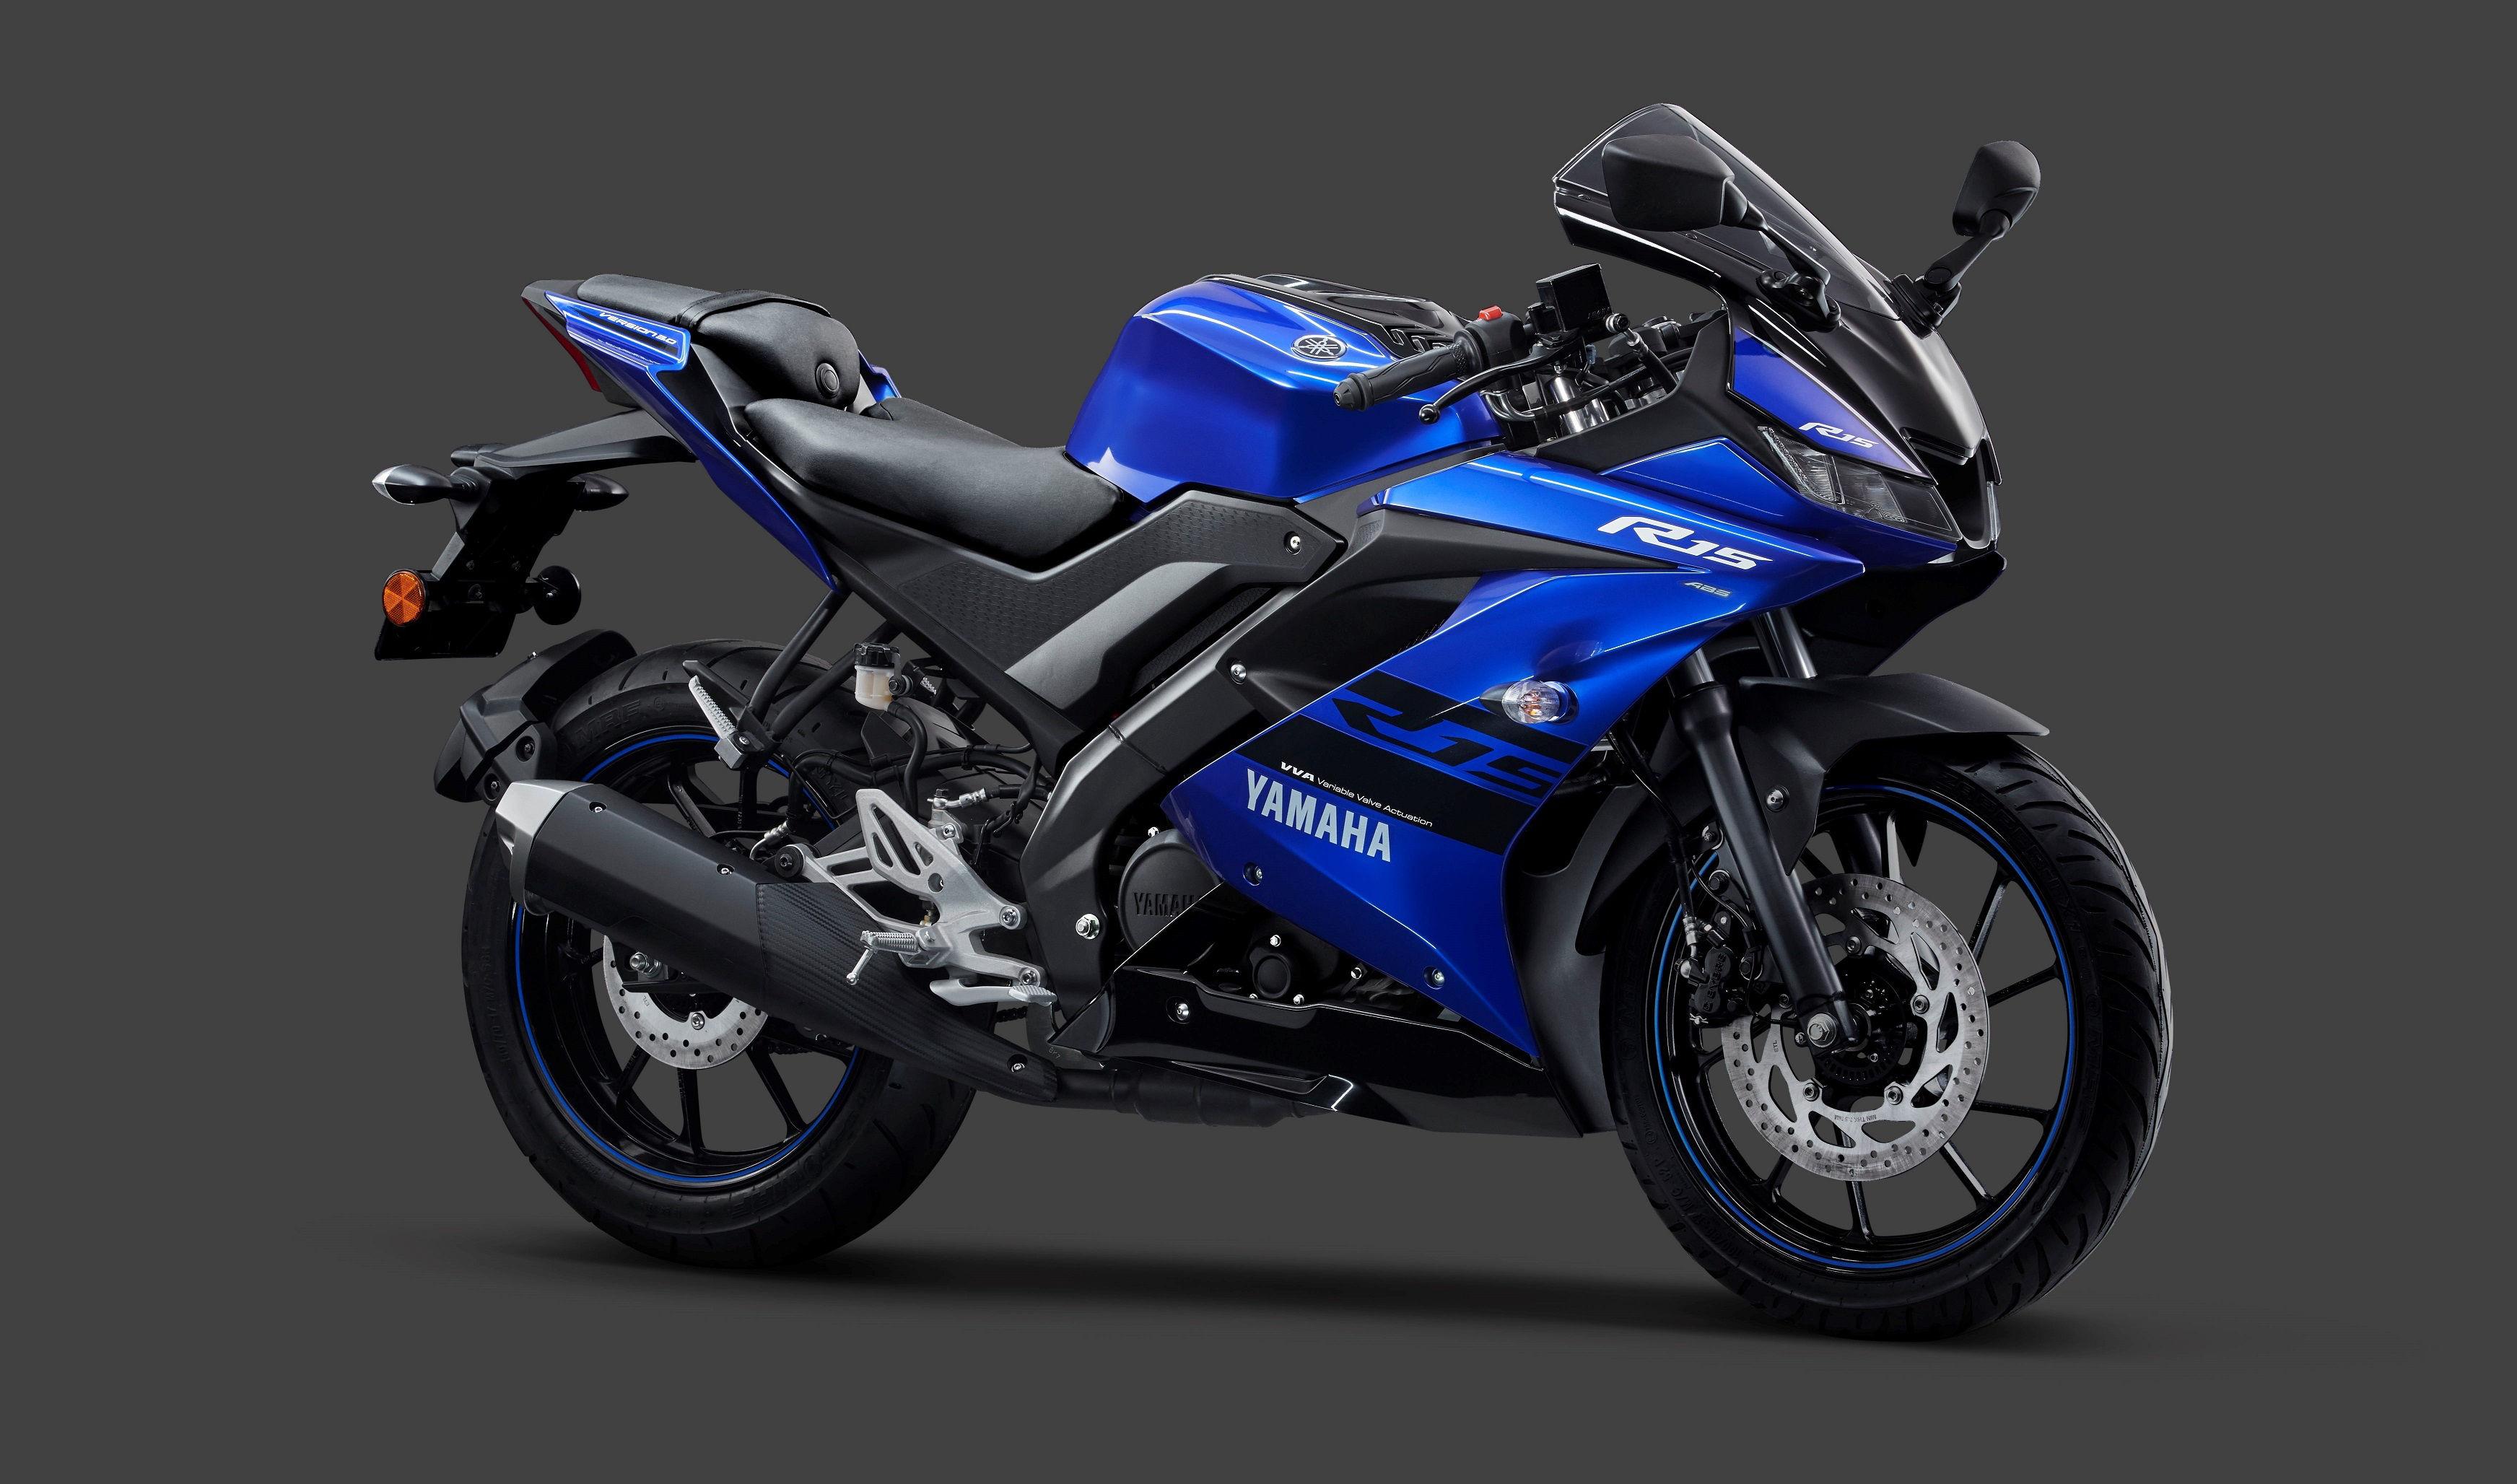 Yamaha YZF R15 V3 ABS Launched